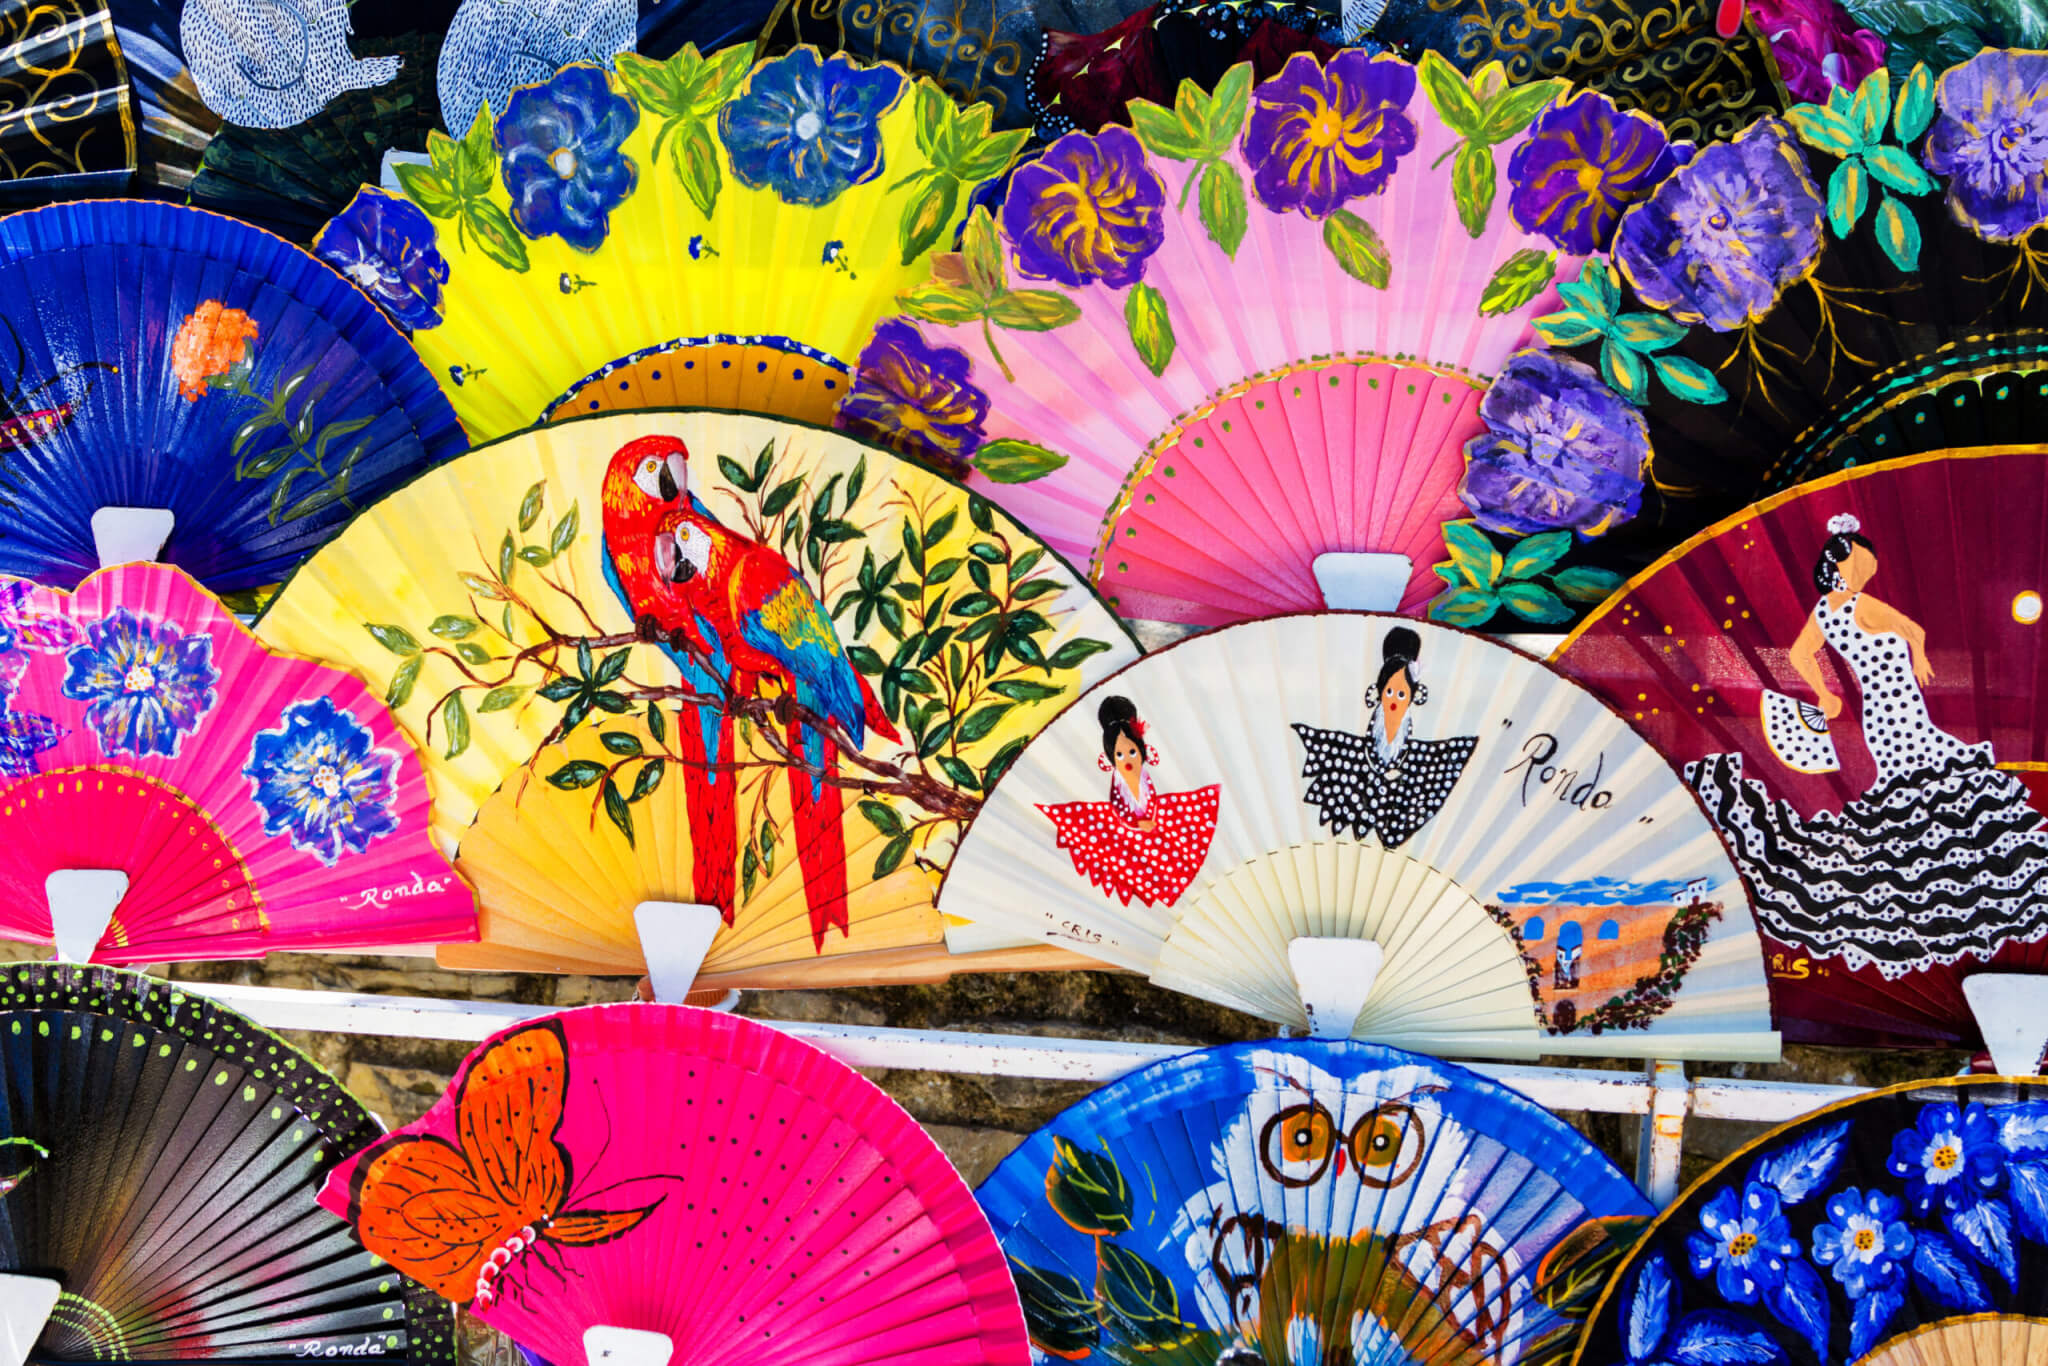 RONDA, SPAIN - MAY 1, 2017: Display of colorful Spanish fans in Ronda - popular tourist destination in Andalusia